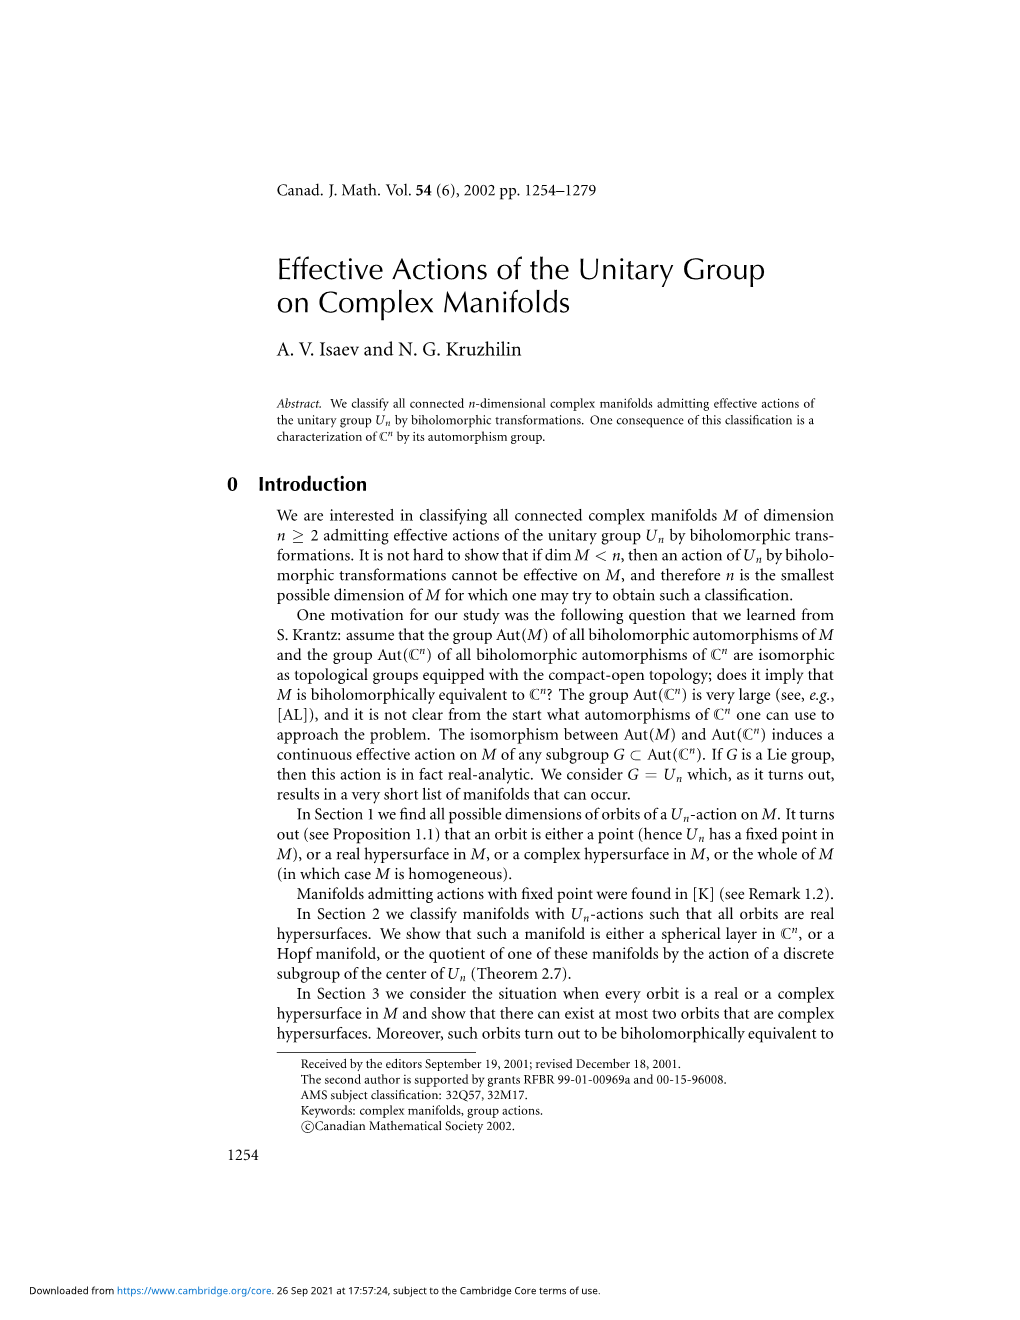 Effective Actions of the Unitary Group on Complex Manifolds